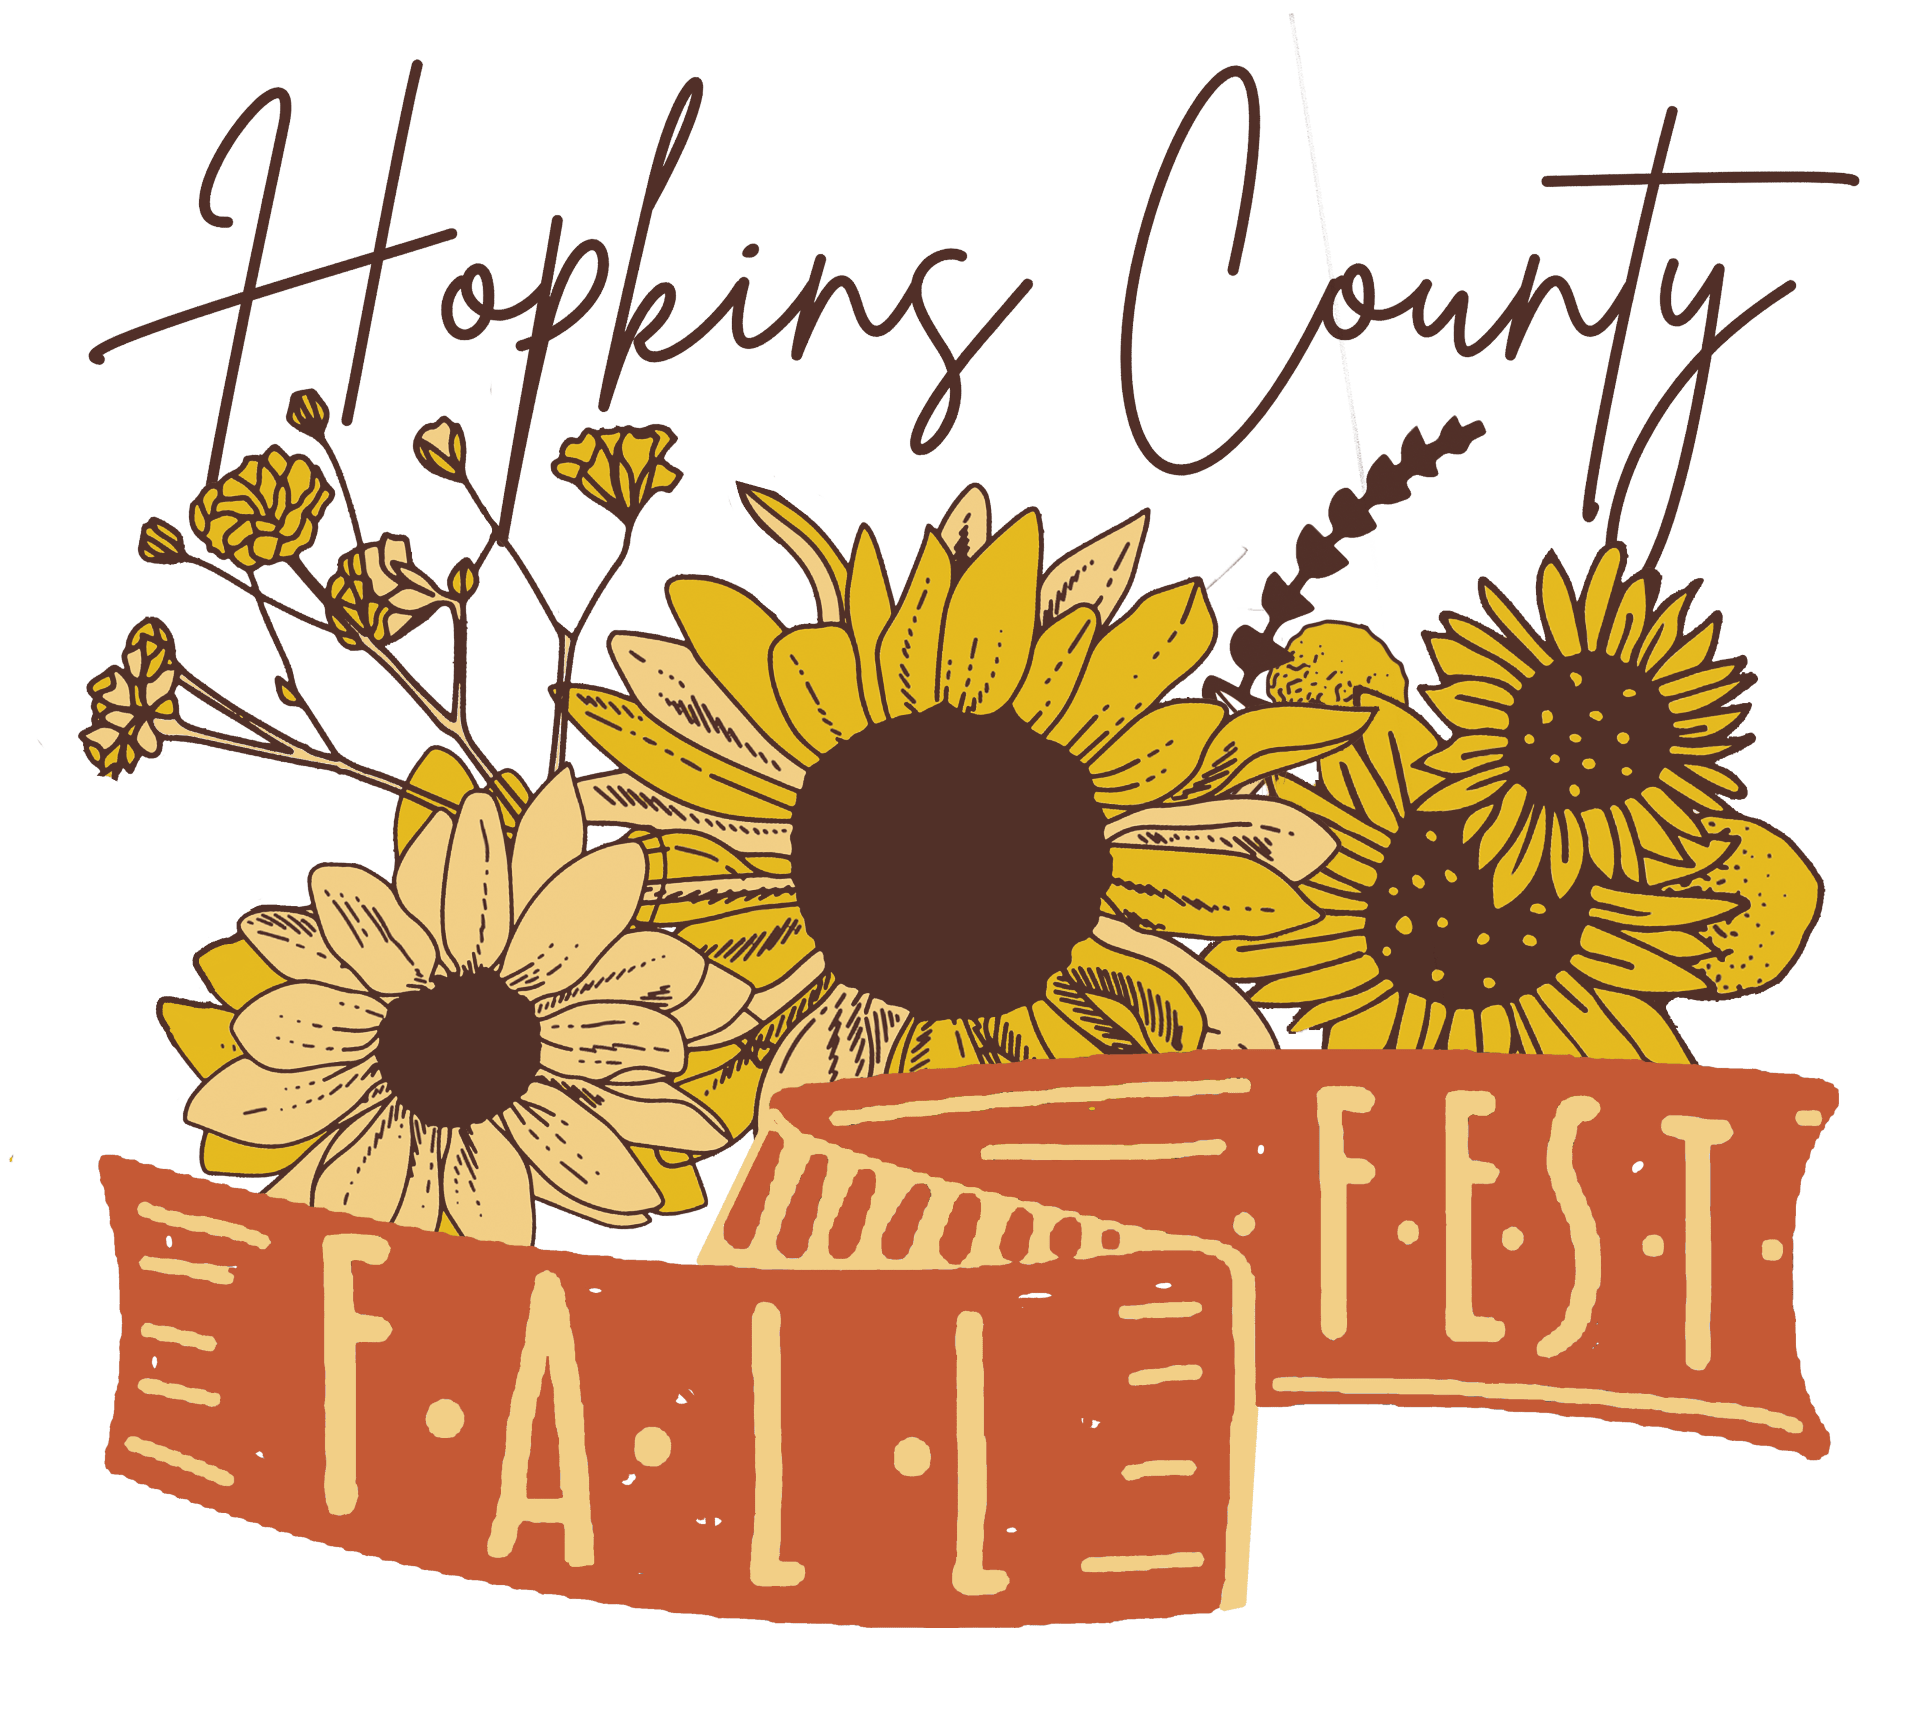 54th Annual Hopkins County Fall Festival Information